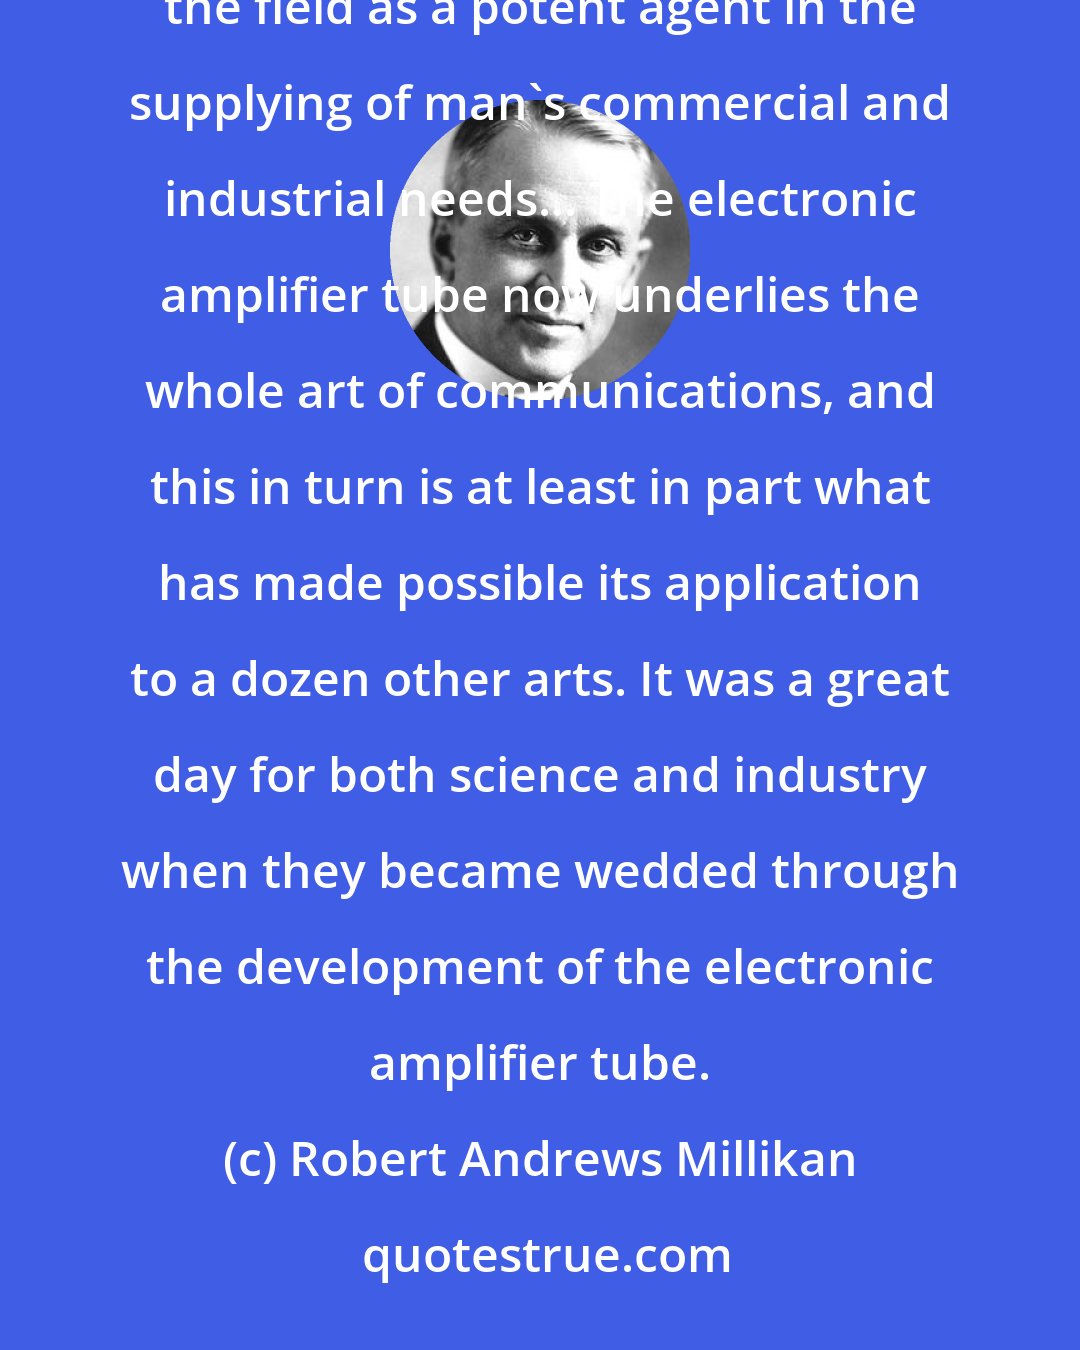 Robert Andrews Millikan: From that night on, the electron-up to that time largely the plaything of the scientist-had clearly entered the field as a potent agent in the supplying of man's commercial and industrial needs... The electronic amplifier tube now underlies the whole art of communications, and this in turn is at least in part what has made possible its application to a dozen other arts. It was a great day for both science and industry when they became wedded through the development of the electronic amplifier tube.